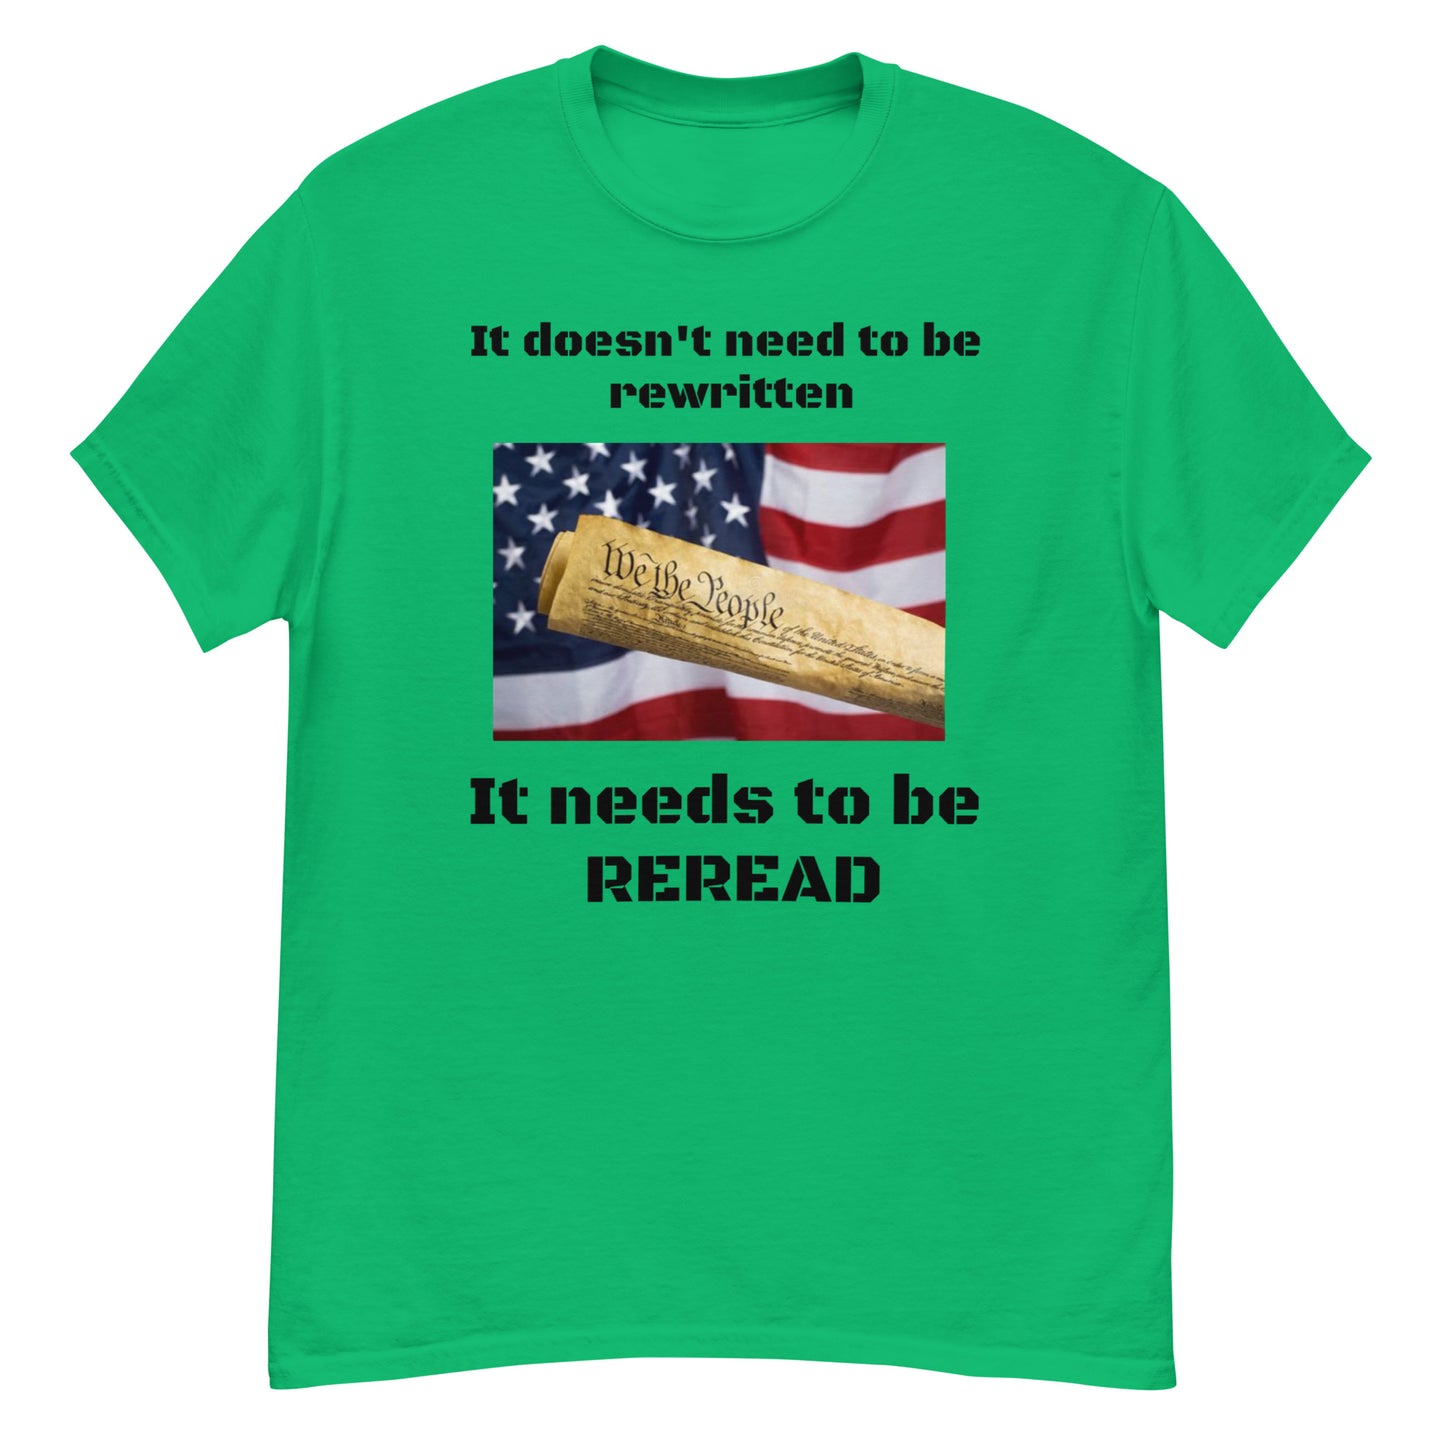 It doesn't need to be rewritten...it needs to be reread classic tee